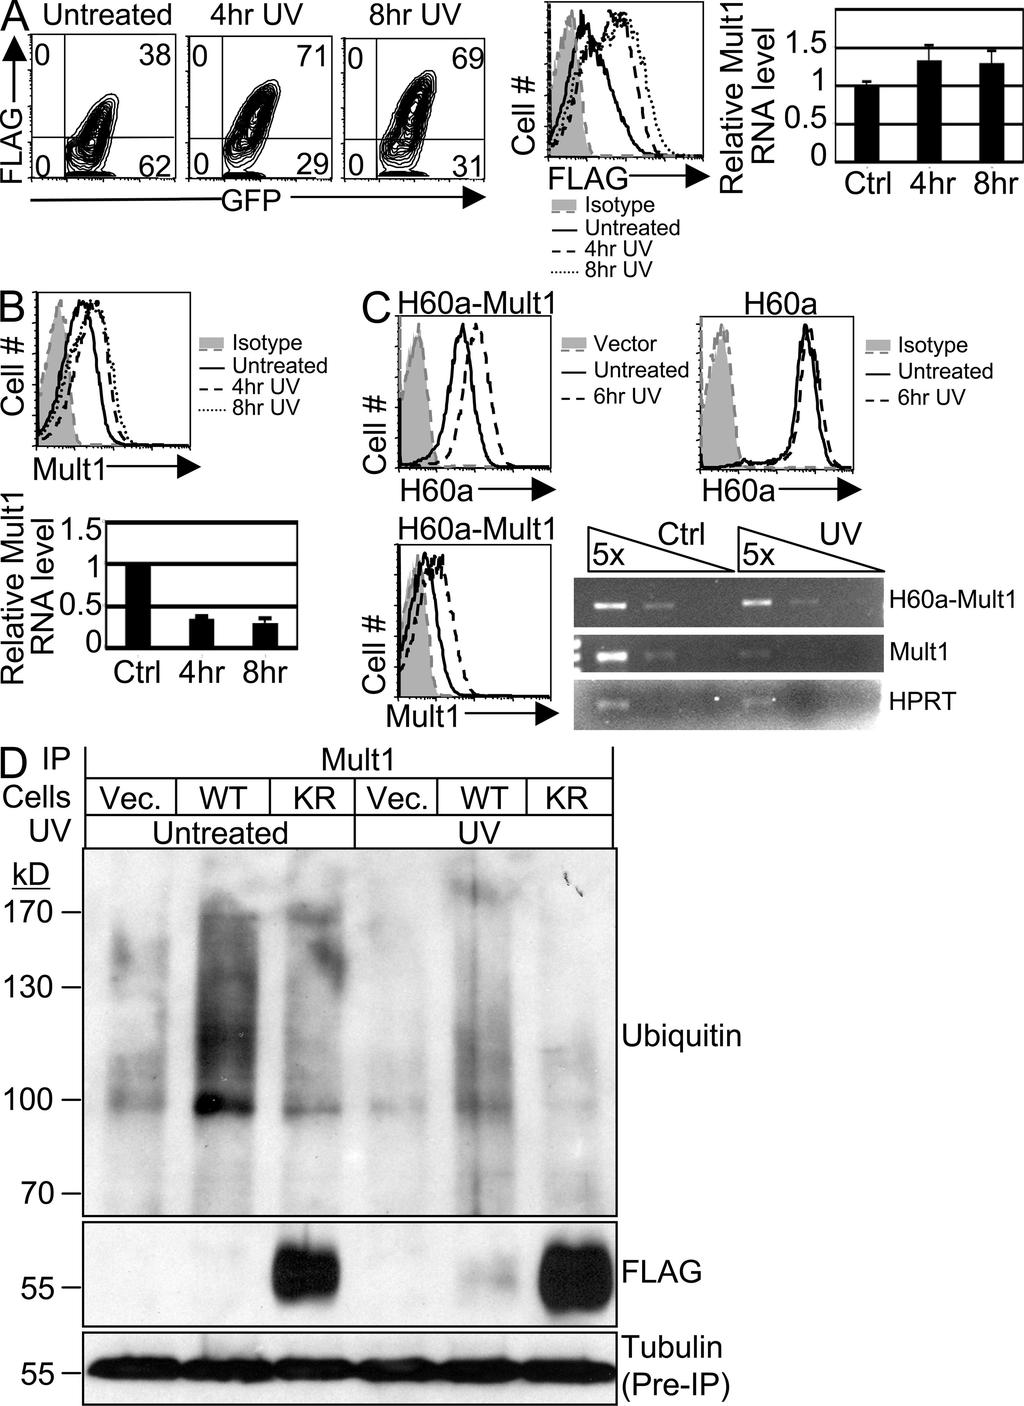 Published January 26, 2009 Heat shock induces Mult1 by increasing protein stability Considering the evidence that the protein level regulation of Mult1 by UV was not mediated by the DNA damage